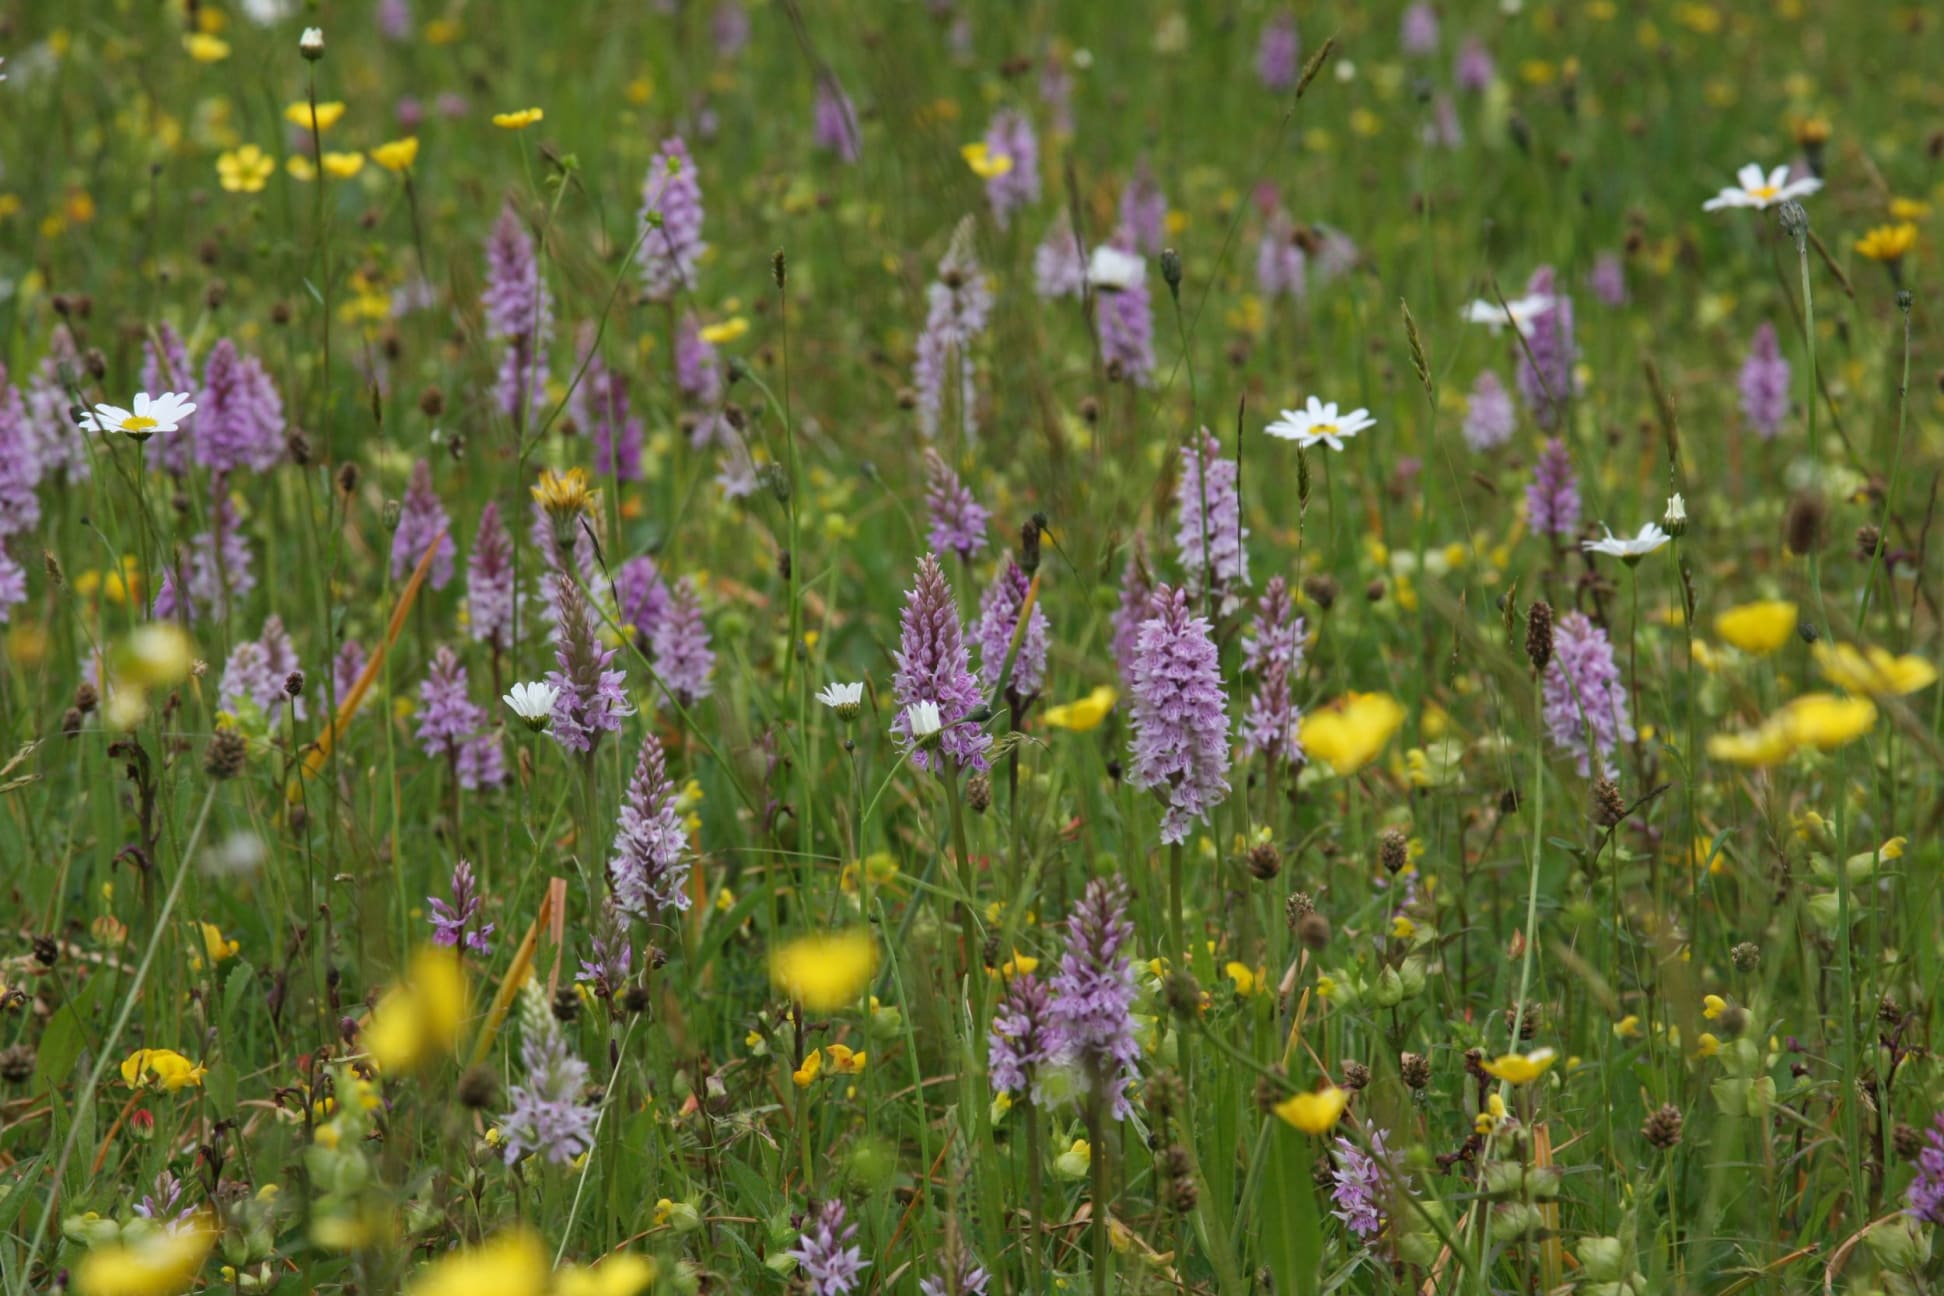 An image of the meadow at Great Dixter with buttercups and common spotted orchids.